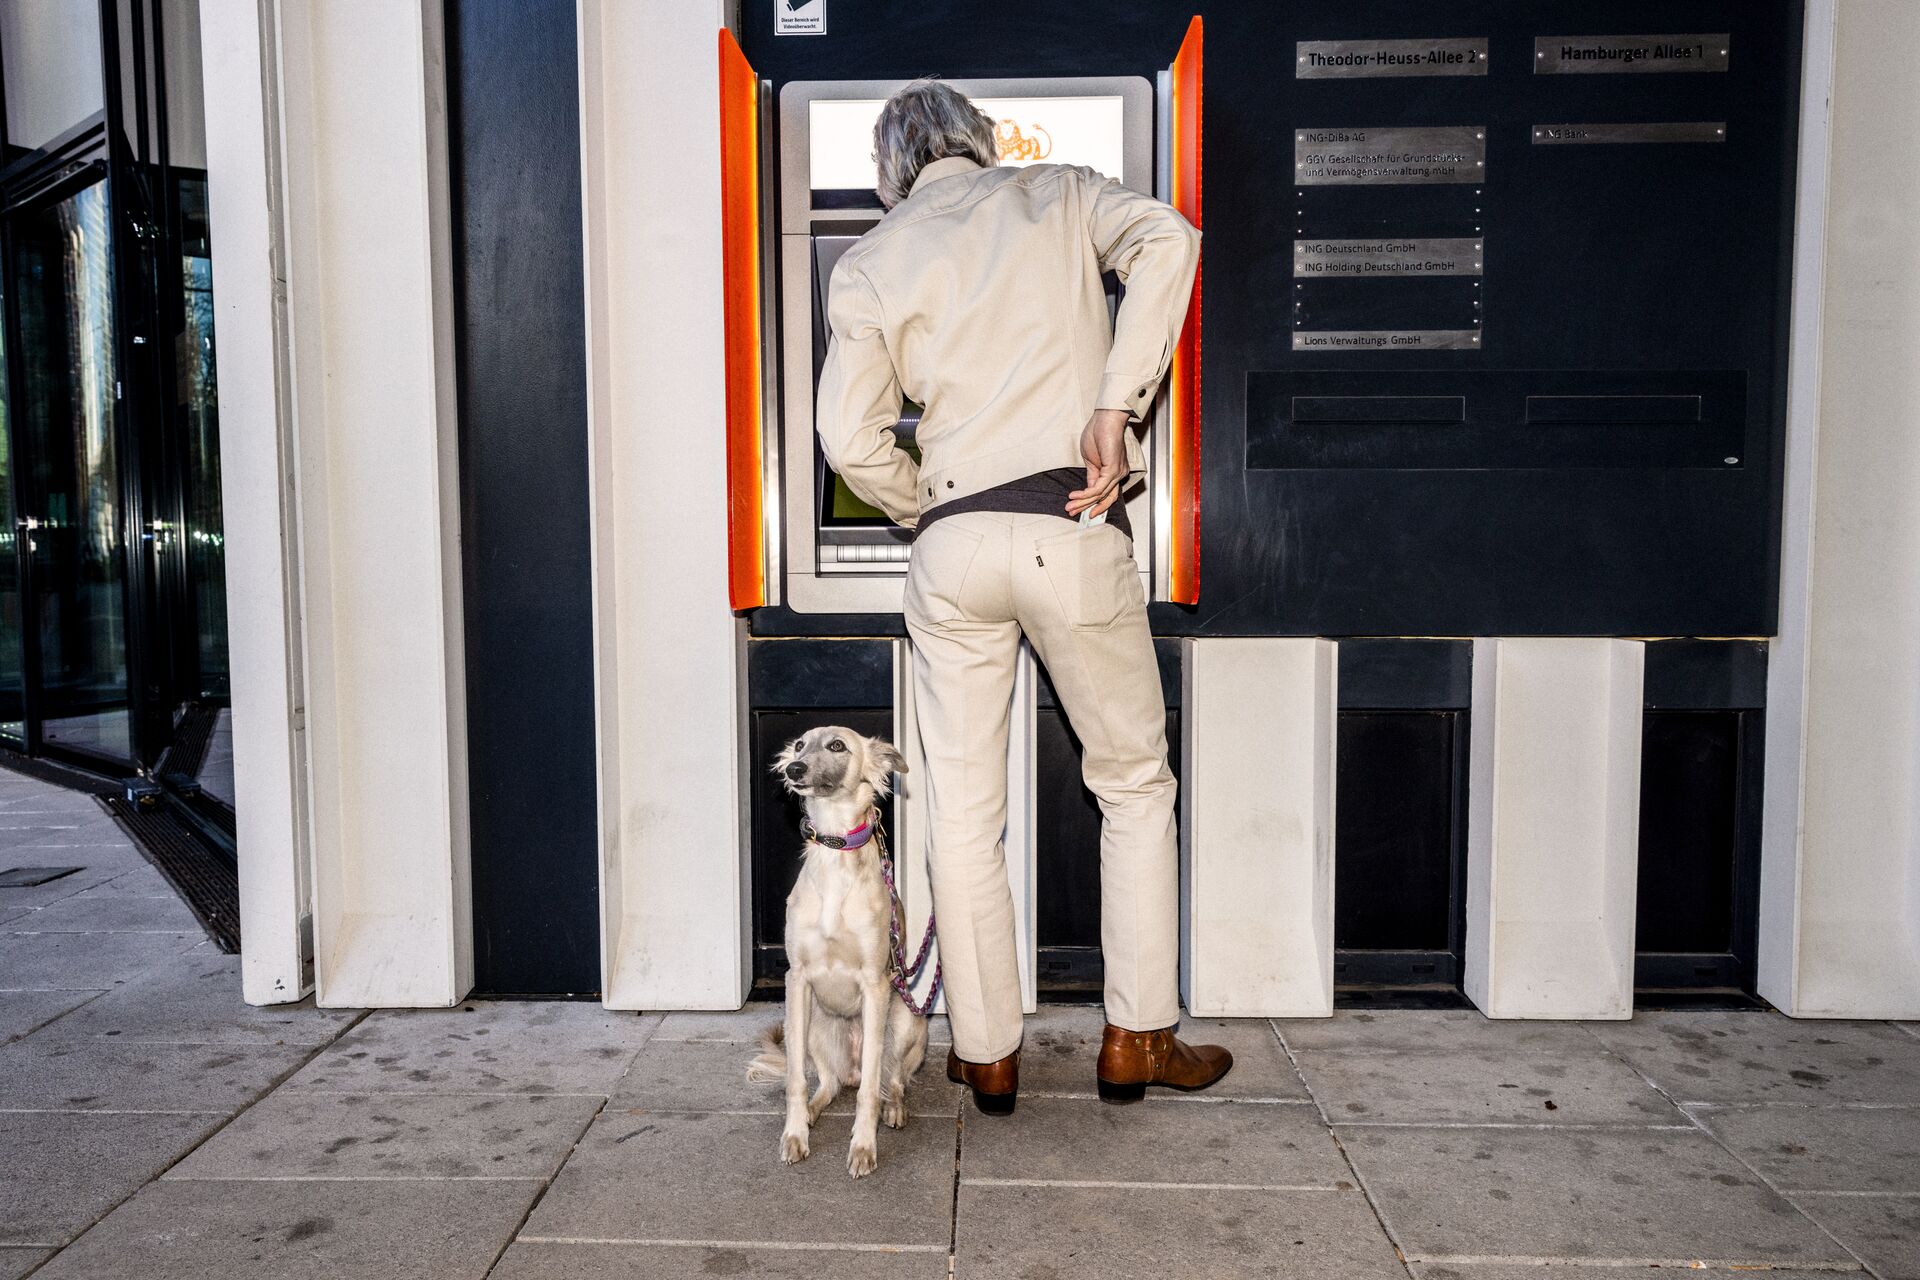 Large_MS PPT_Web-Back view of a man and his dog at an ATM machine outside.jpg